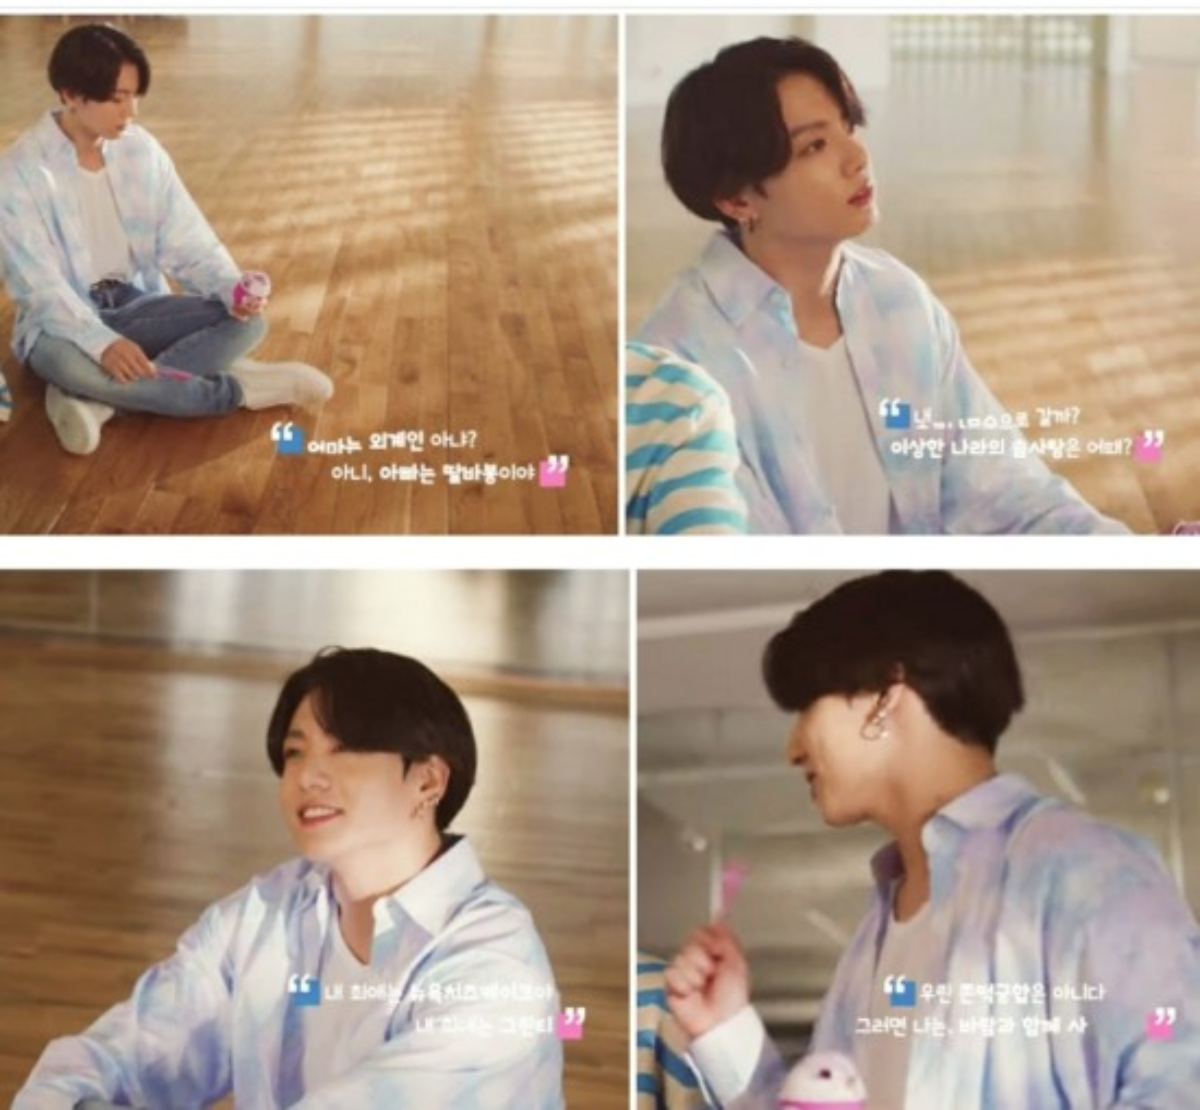 BTS Jungkook, The Handsome Guy in the Ice Cream Commercial